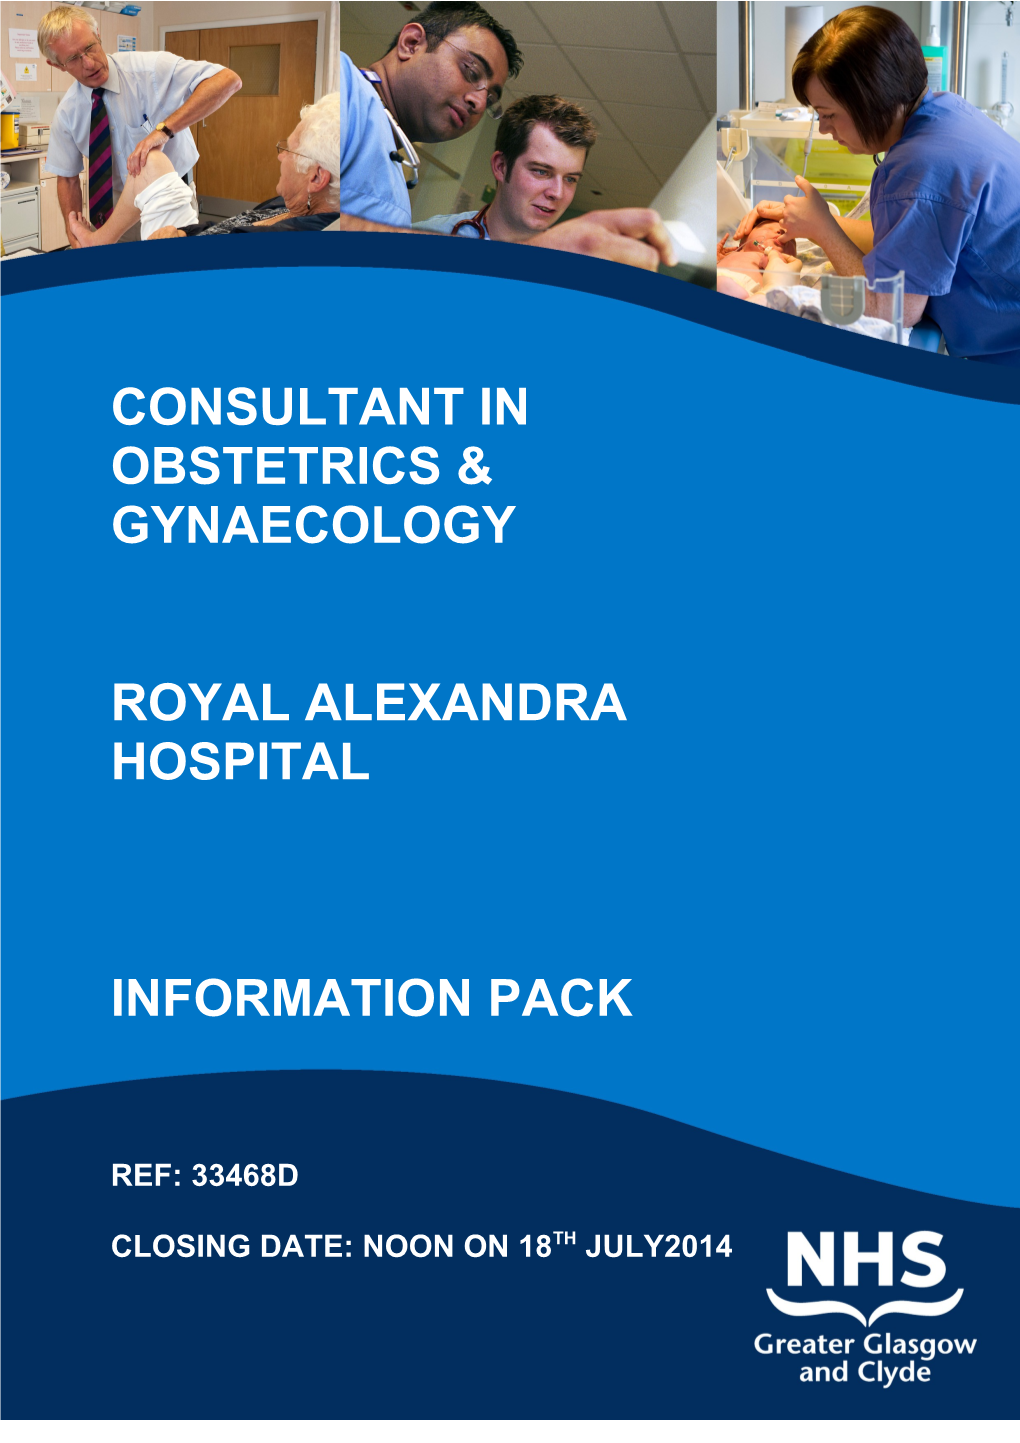 Consultant in Obstetrics & Gynaecology